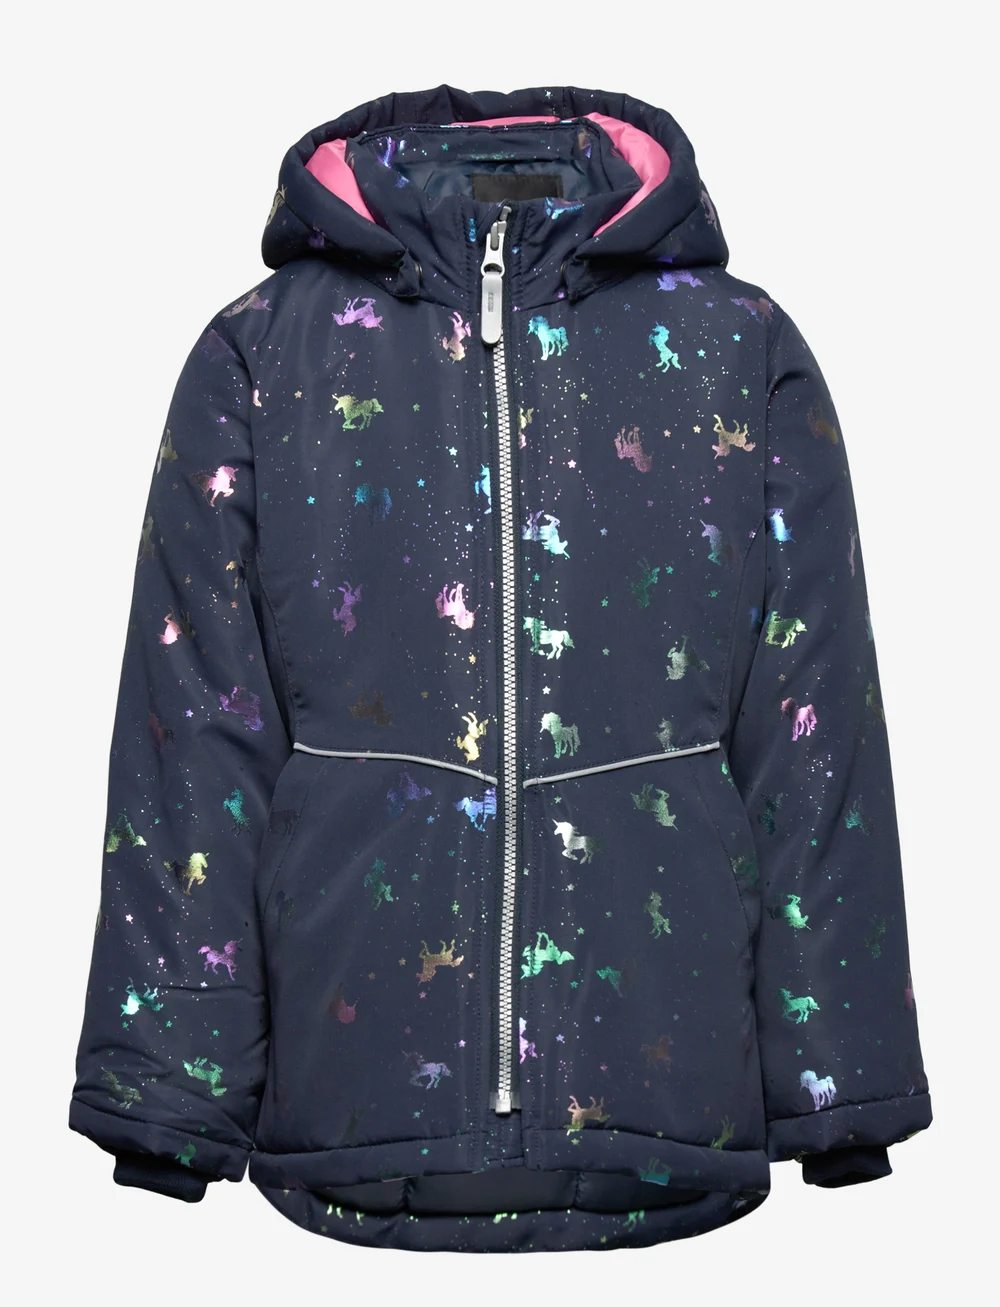 name it Nmfmaxi Jacket Foil Aop Noos - 23.99 €. Buy Parkas from name it  online at Boozt.com. Fast delivery and easy returns